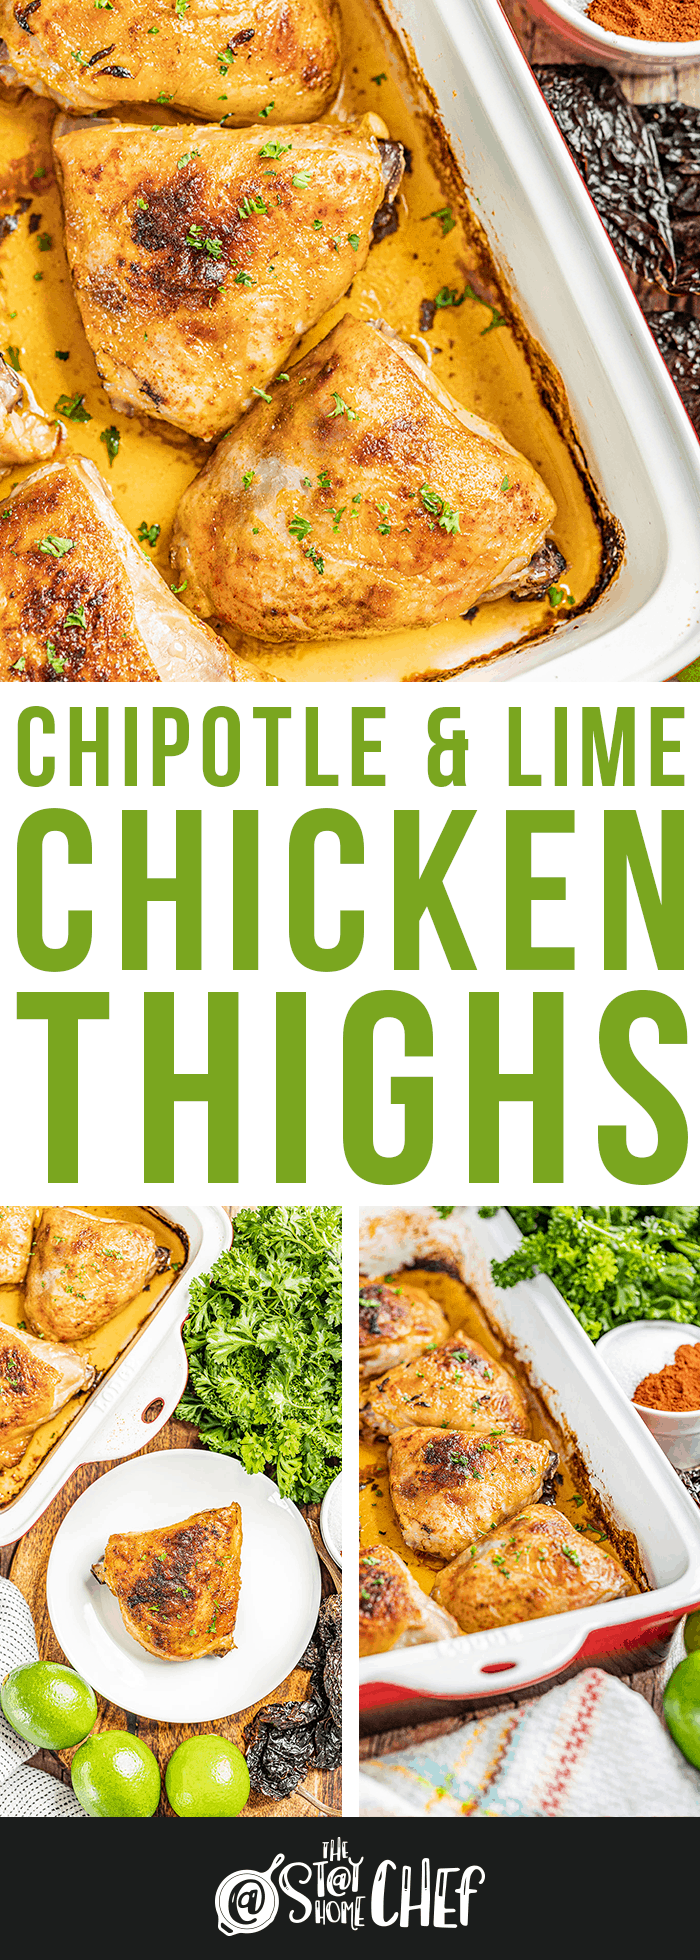 Chipotle & Lime Chicken Thighs